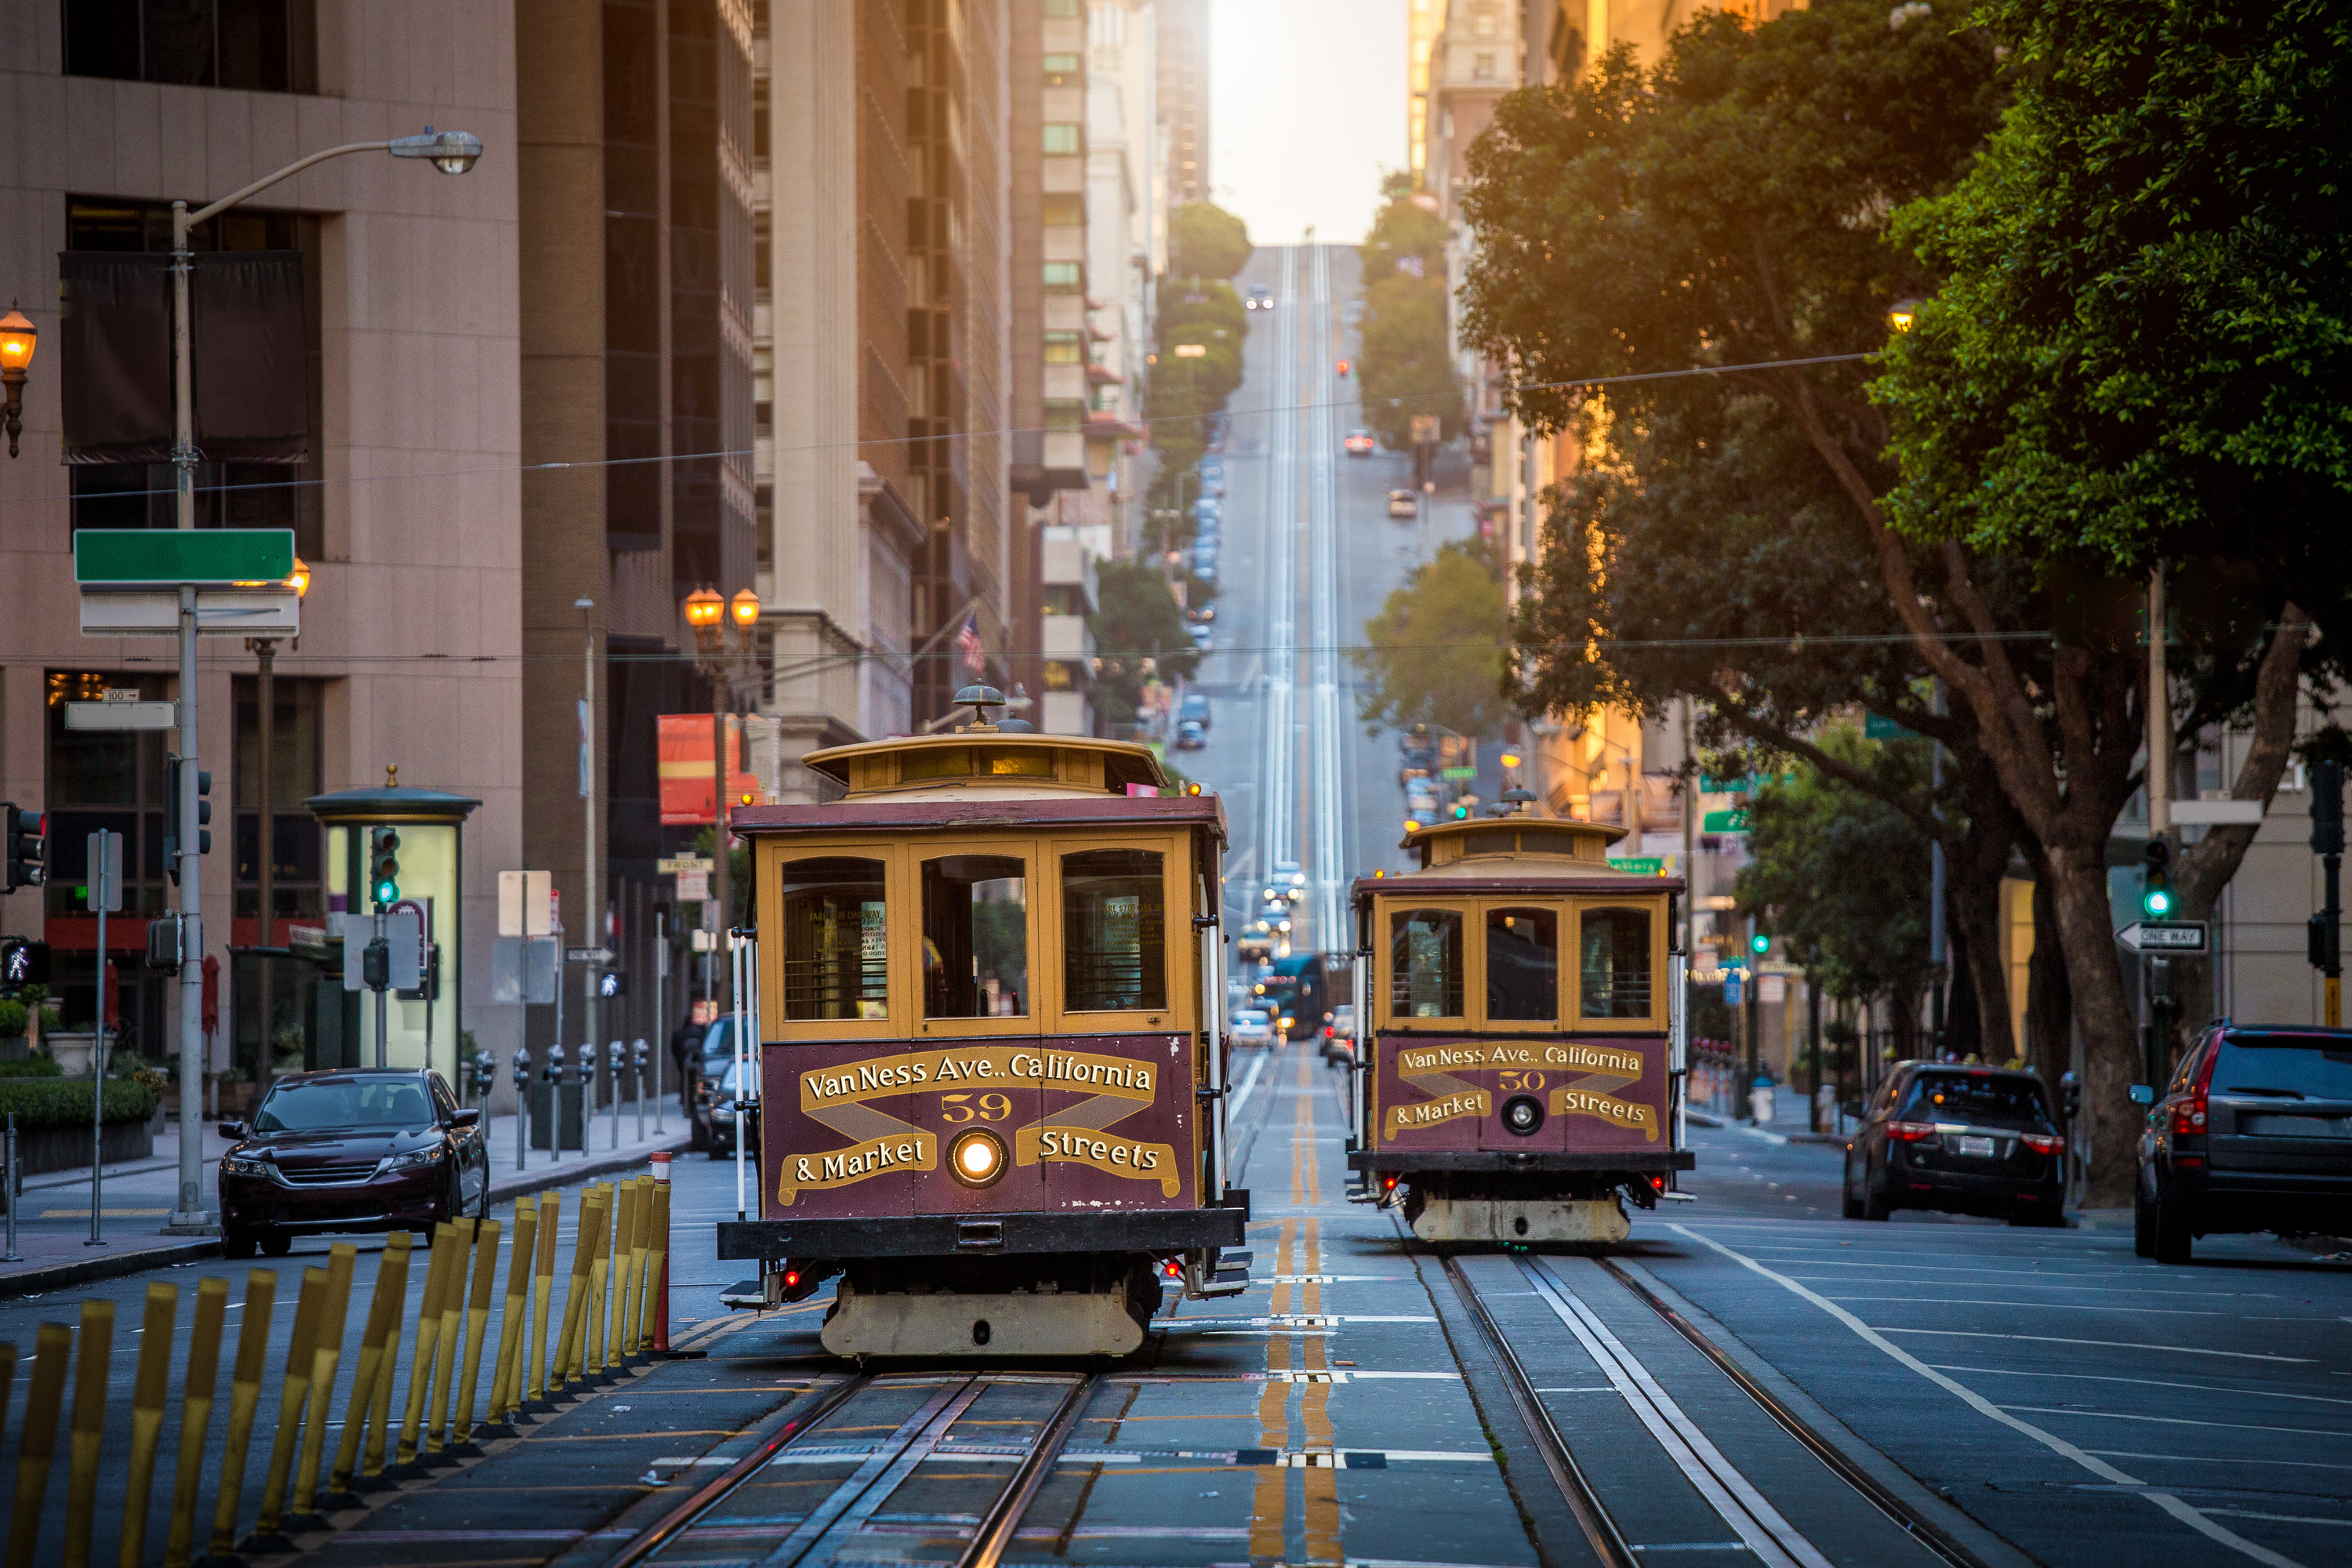 historic cable cars coming down a street with a steep incline in San Francisco